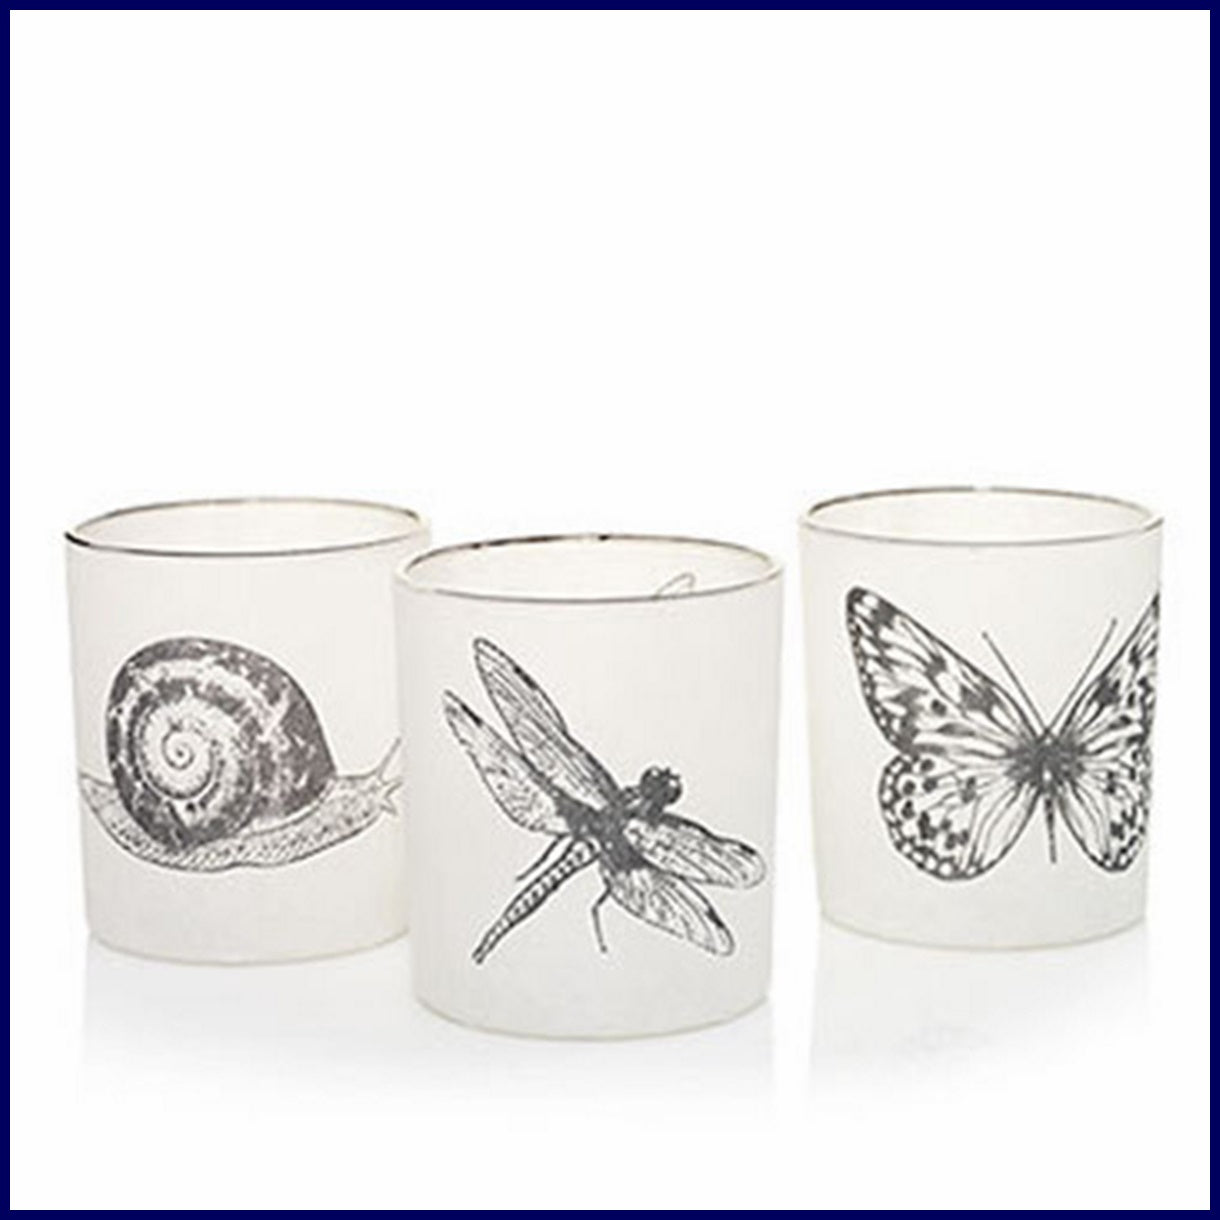 YANKEE CANDLE NATURE'S AUTUMN VOTIVE TEALIGHT CANDLE HOLDER TRIO Snail Butterfly & Dragonfly - Plastic Glass and Wax ~ PGW